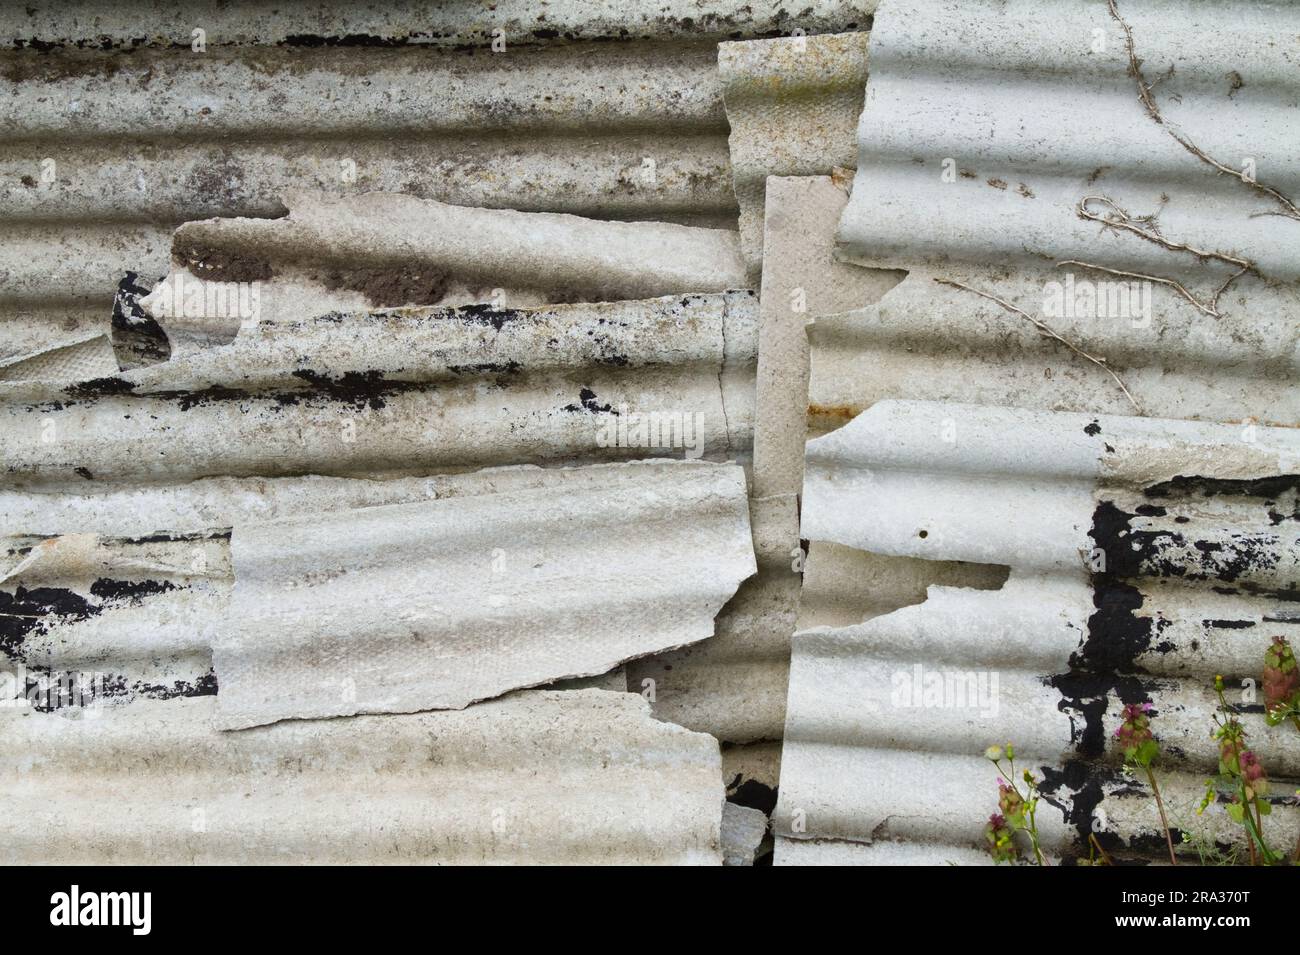 Piles Of Old Broken Asbestos Cement Sheets Piled Up Together. Toxic, Cancer Inducing Causing Lung Problems And Asbestosis, England UK Stock Photo